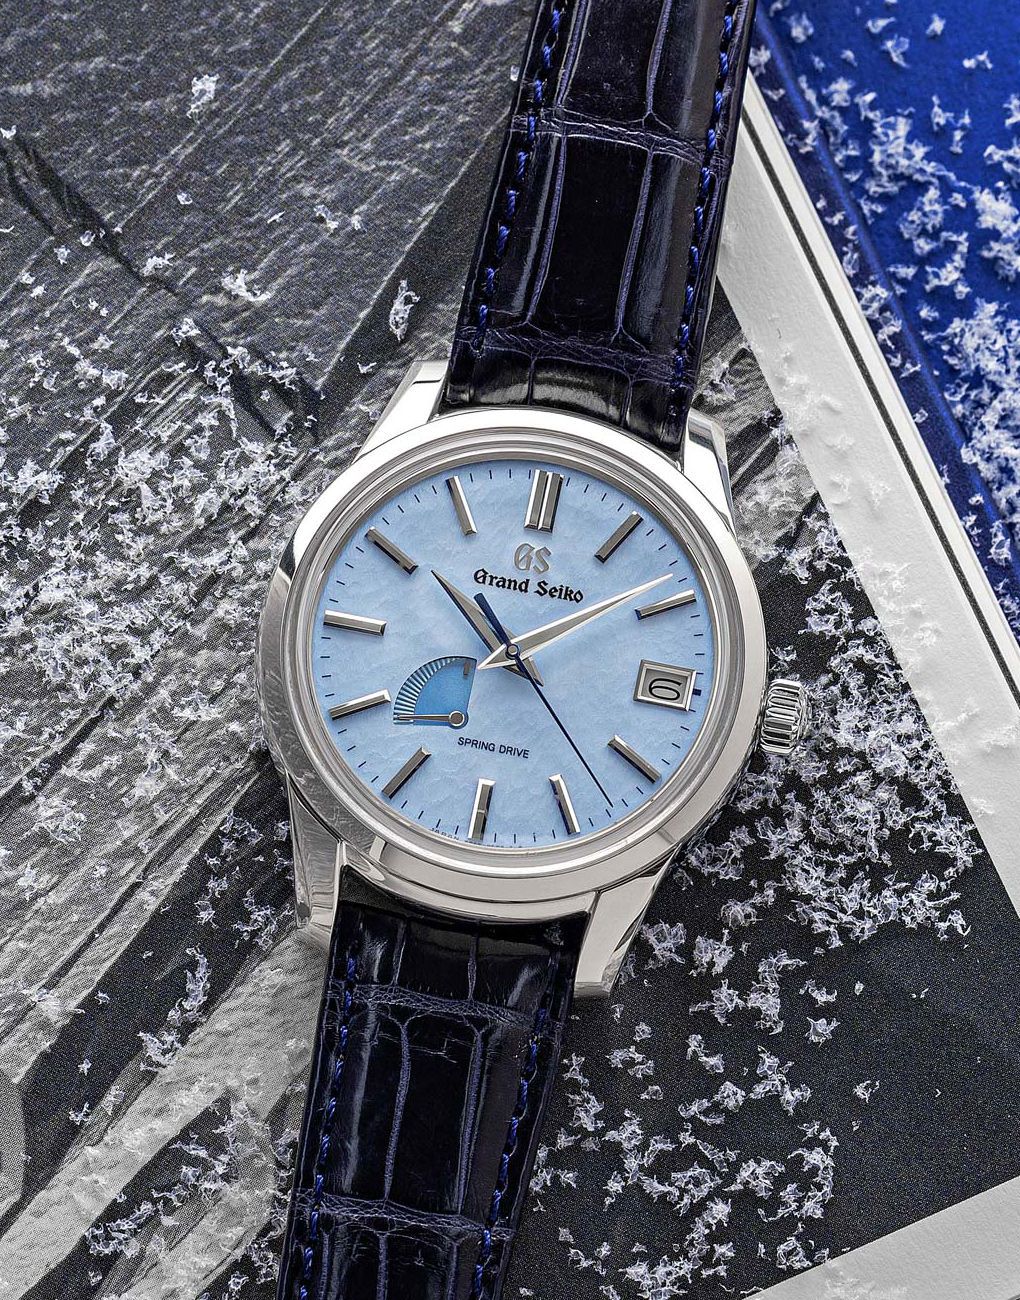 The Many Faces Of The Spring Drive: Grand Seiko's Alluring Dials